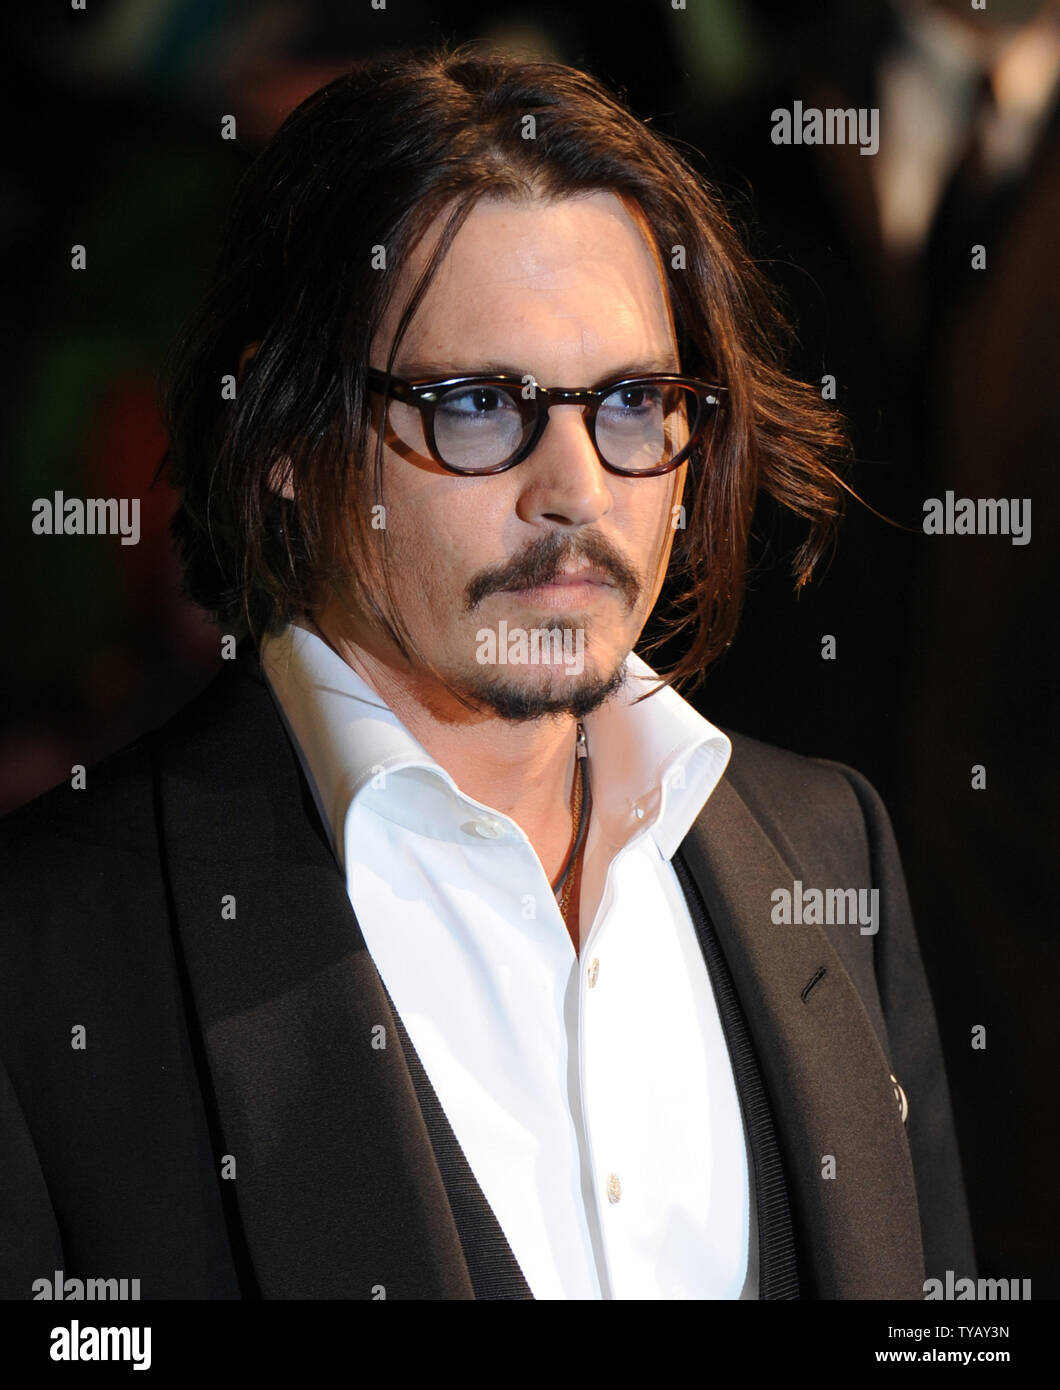 American actor Johnny Depp attends the World premiere of 